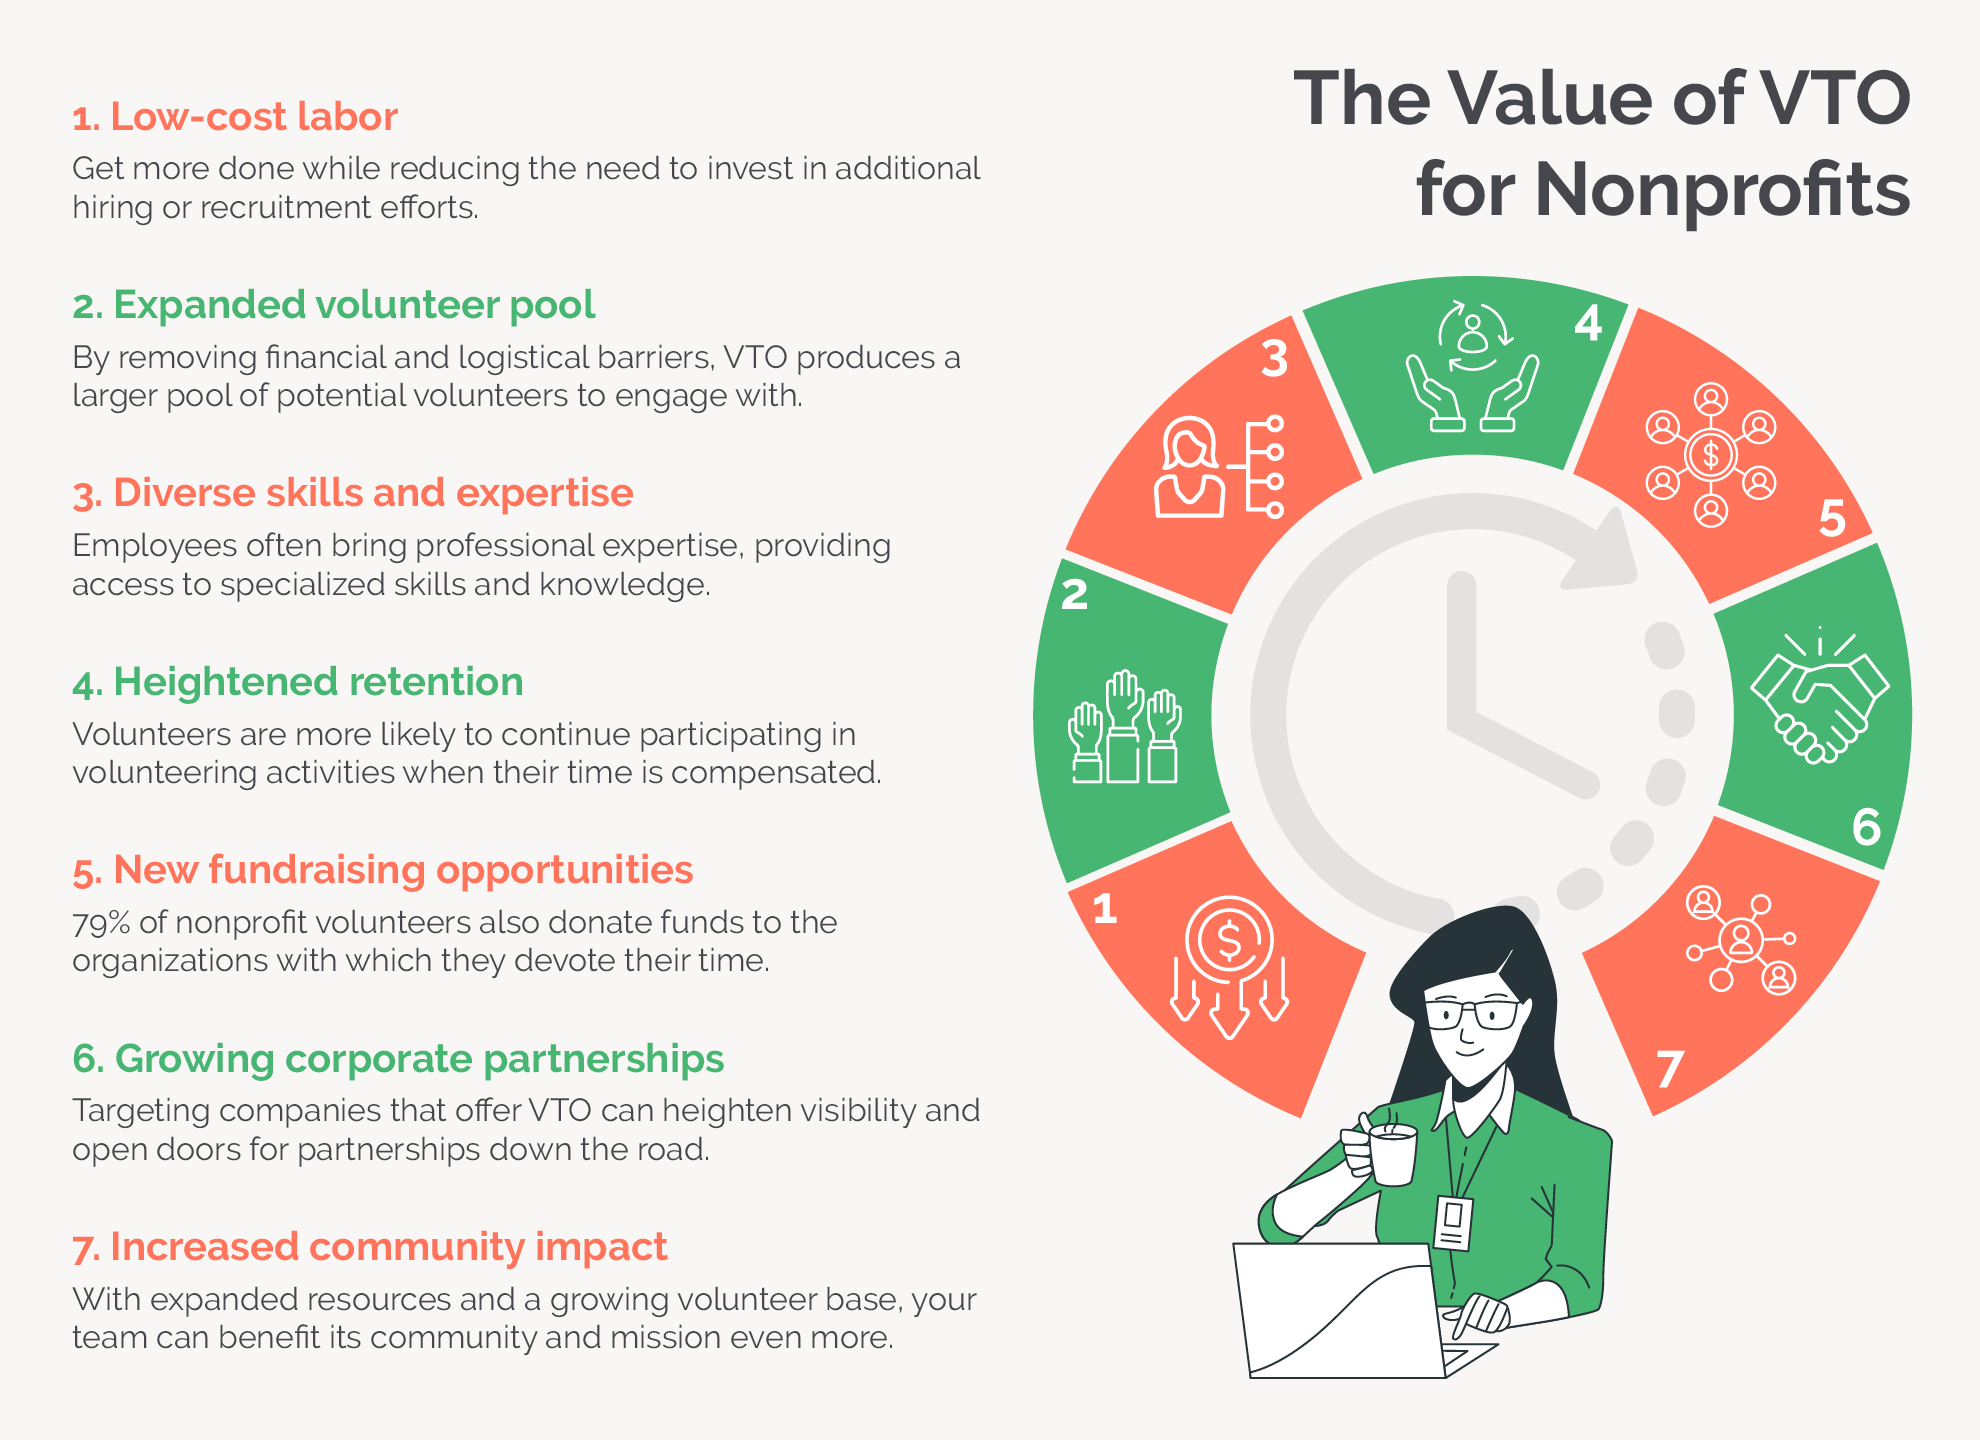 The value of volunteer time off for nonprofits